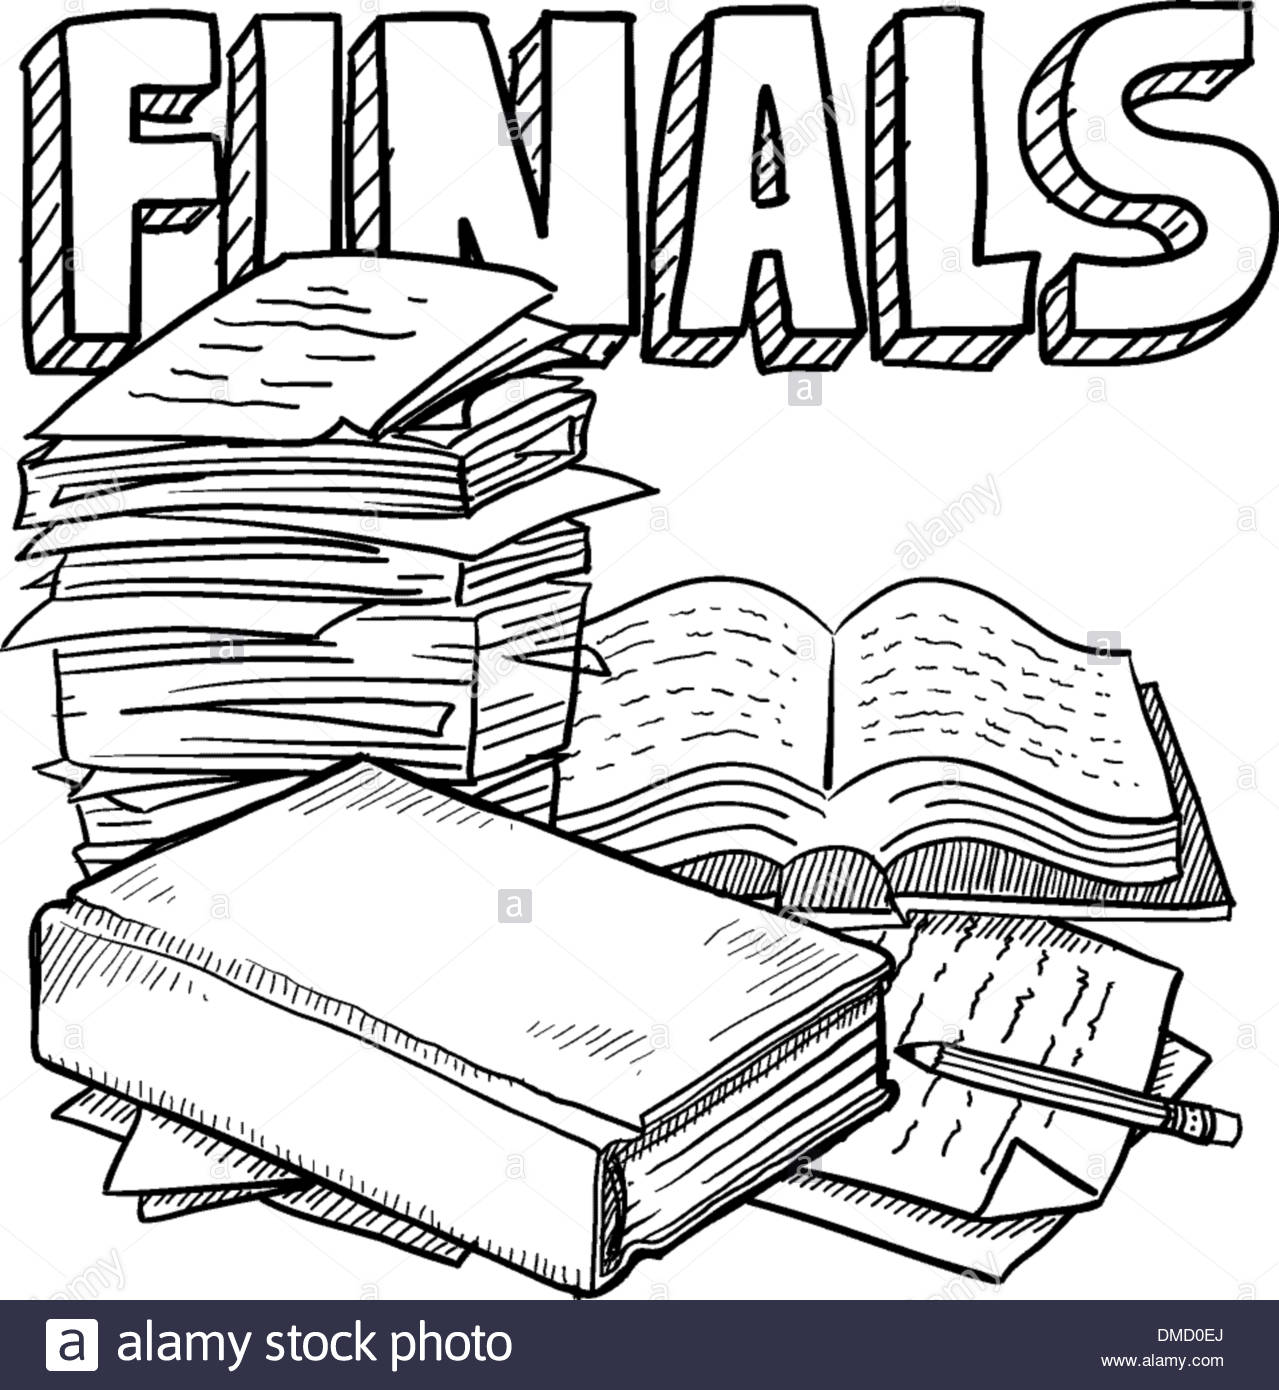 Final Exam High Quality Background on Wallpapers Vista